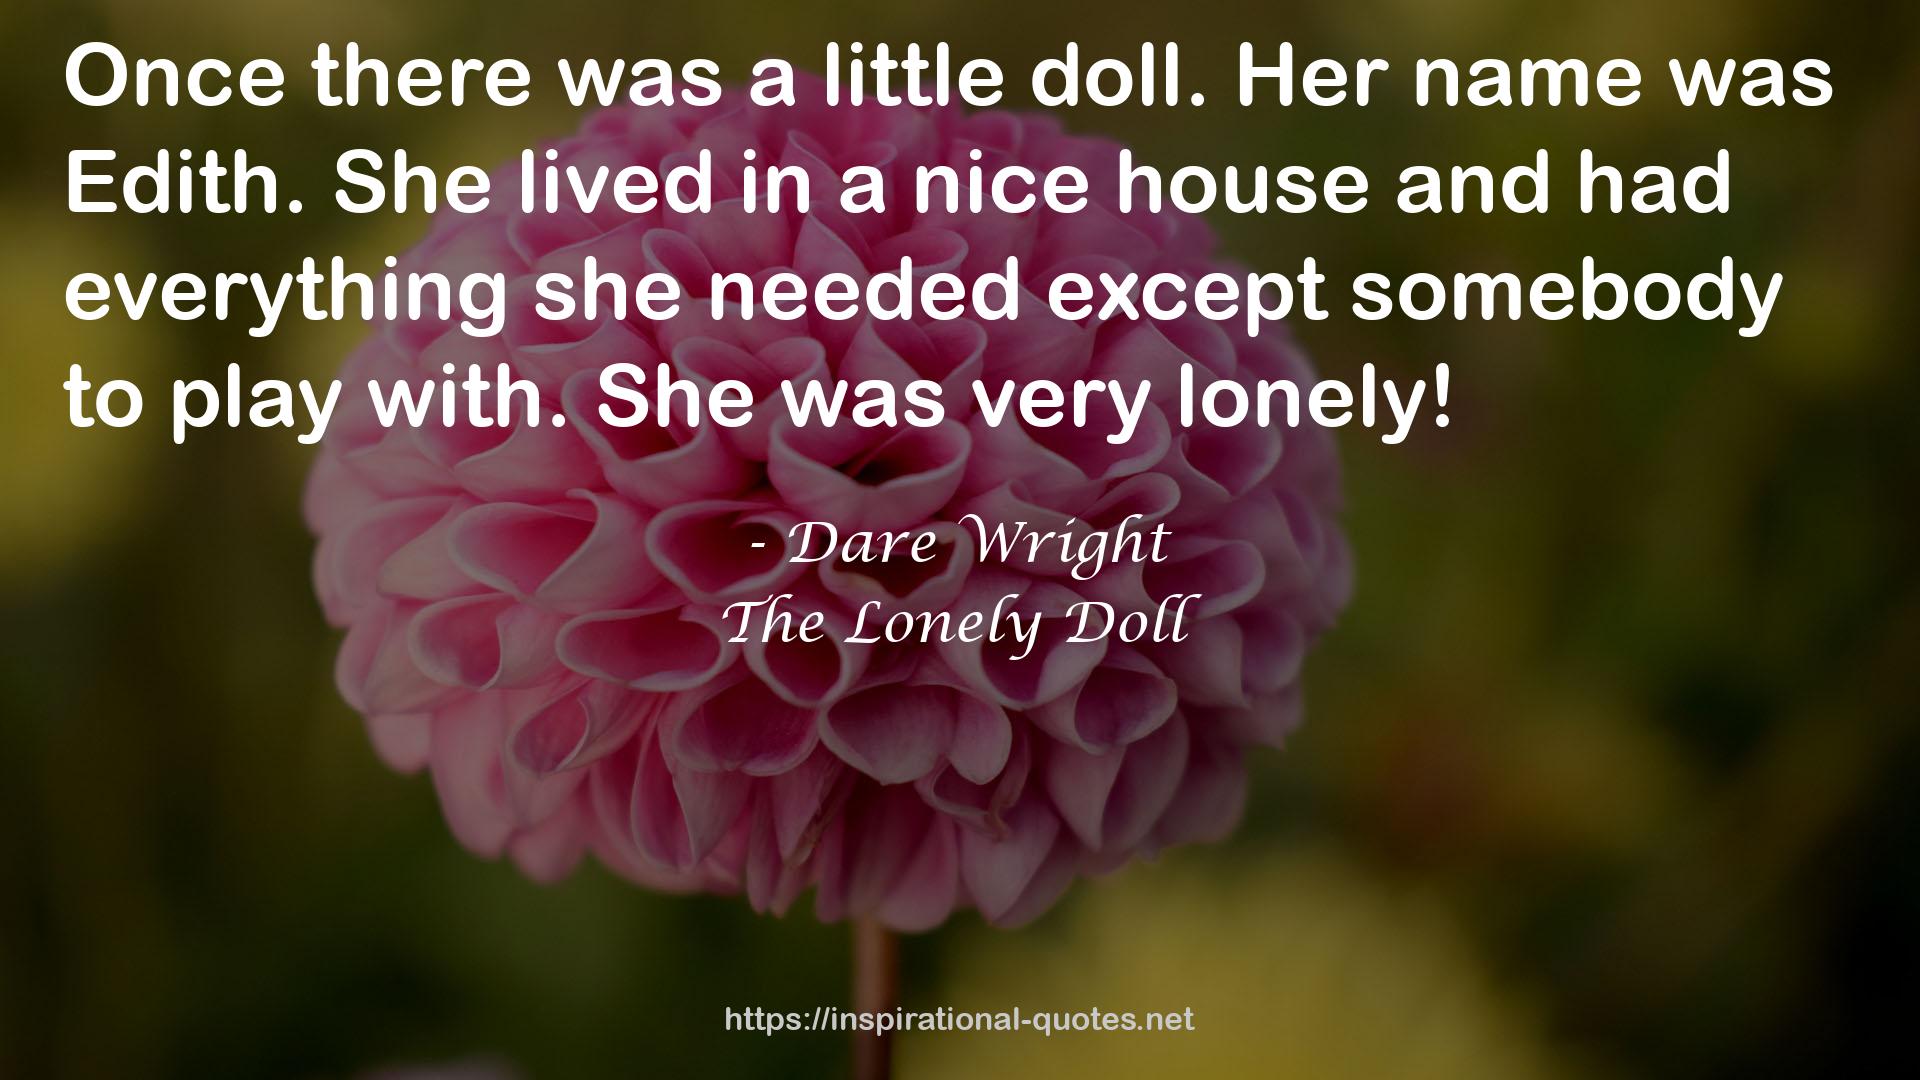 The Lonely Doll QUOTES